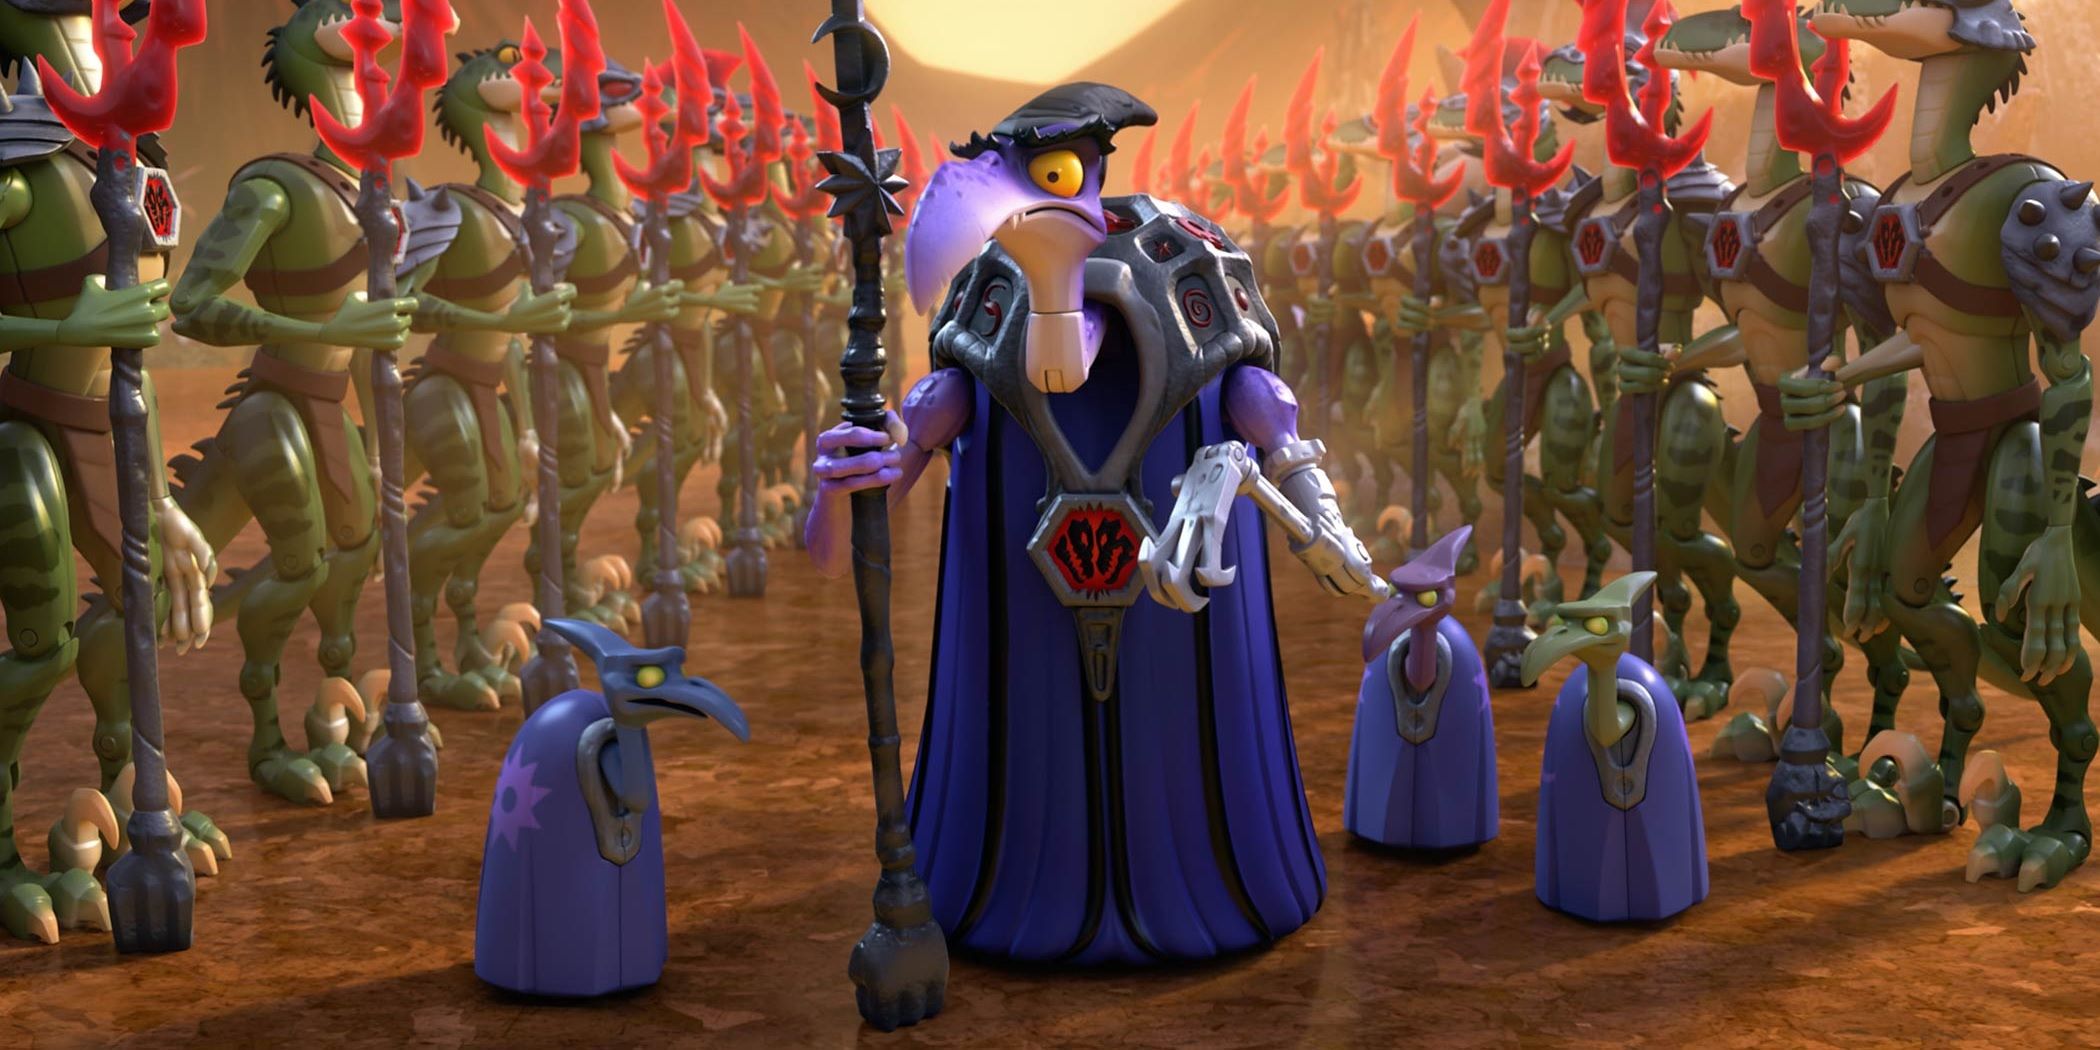 The Cleric in Toy Story That Time Forgot